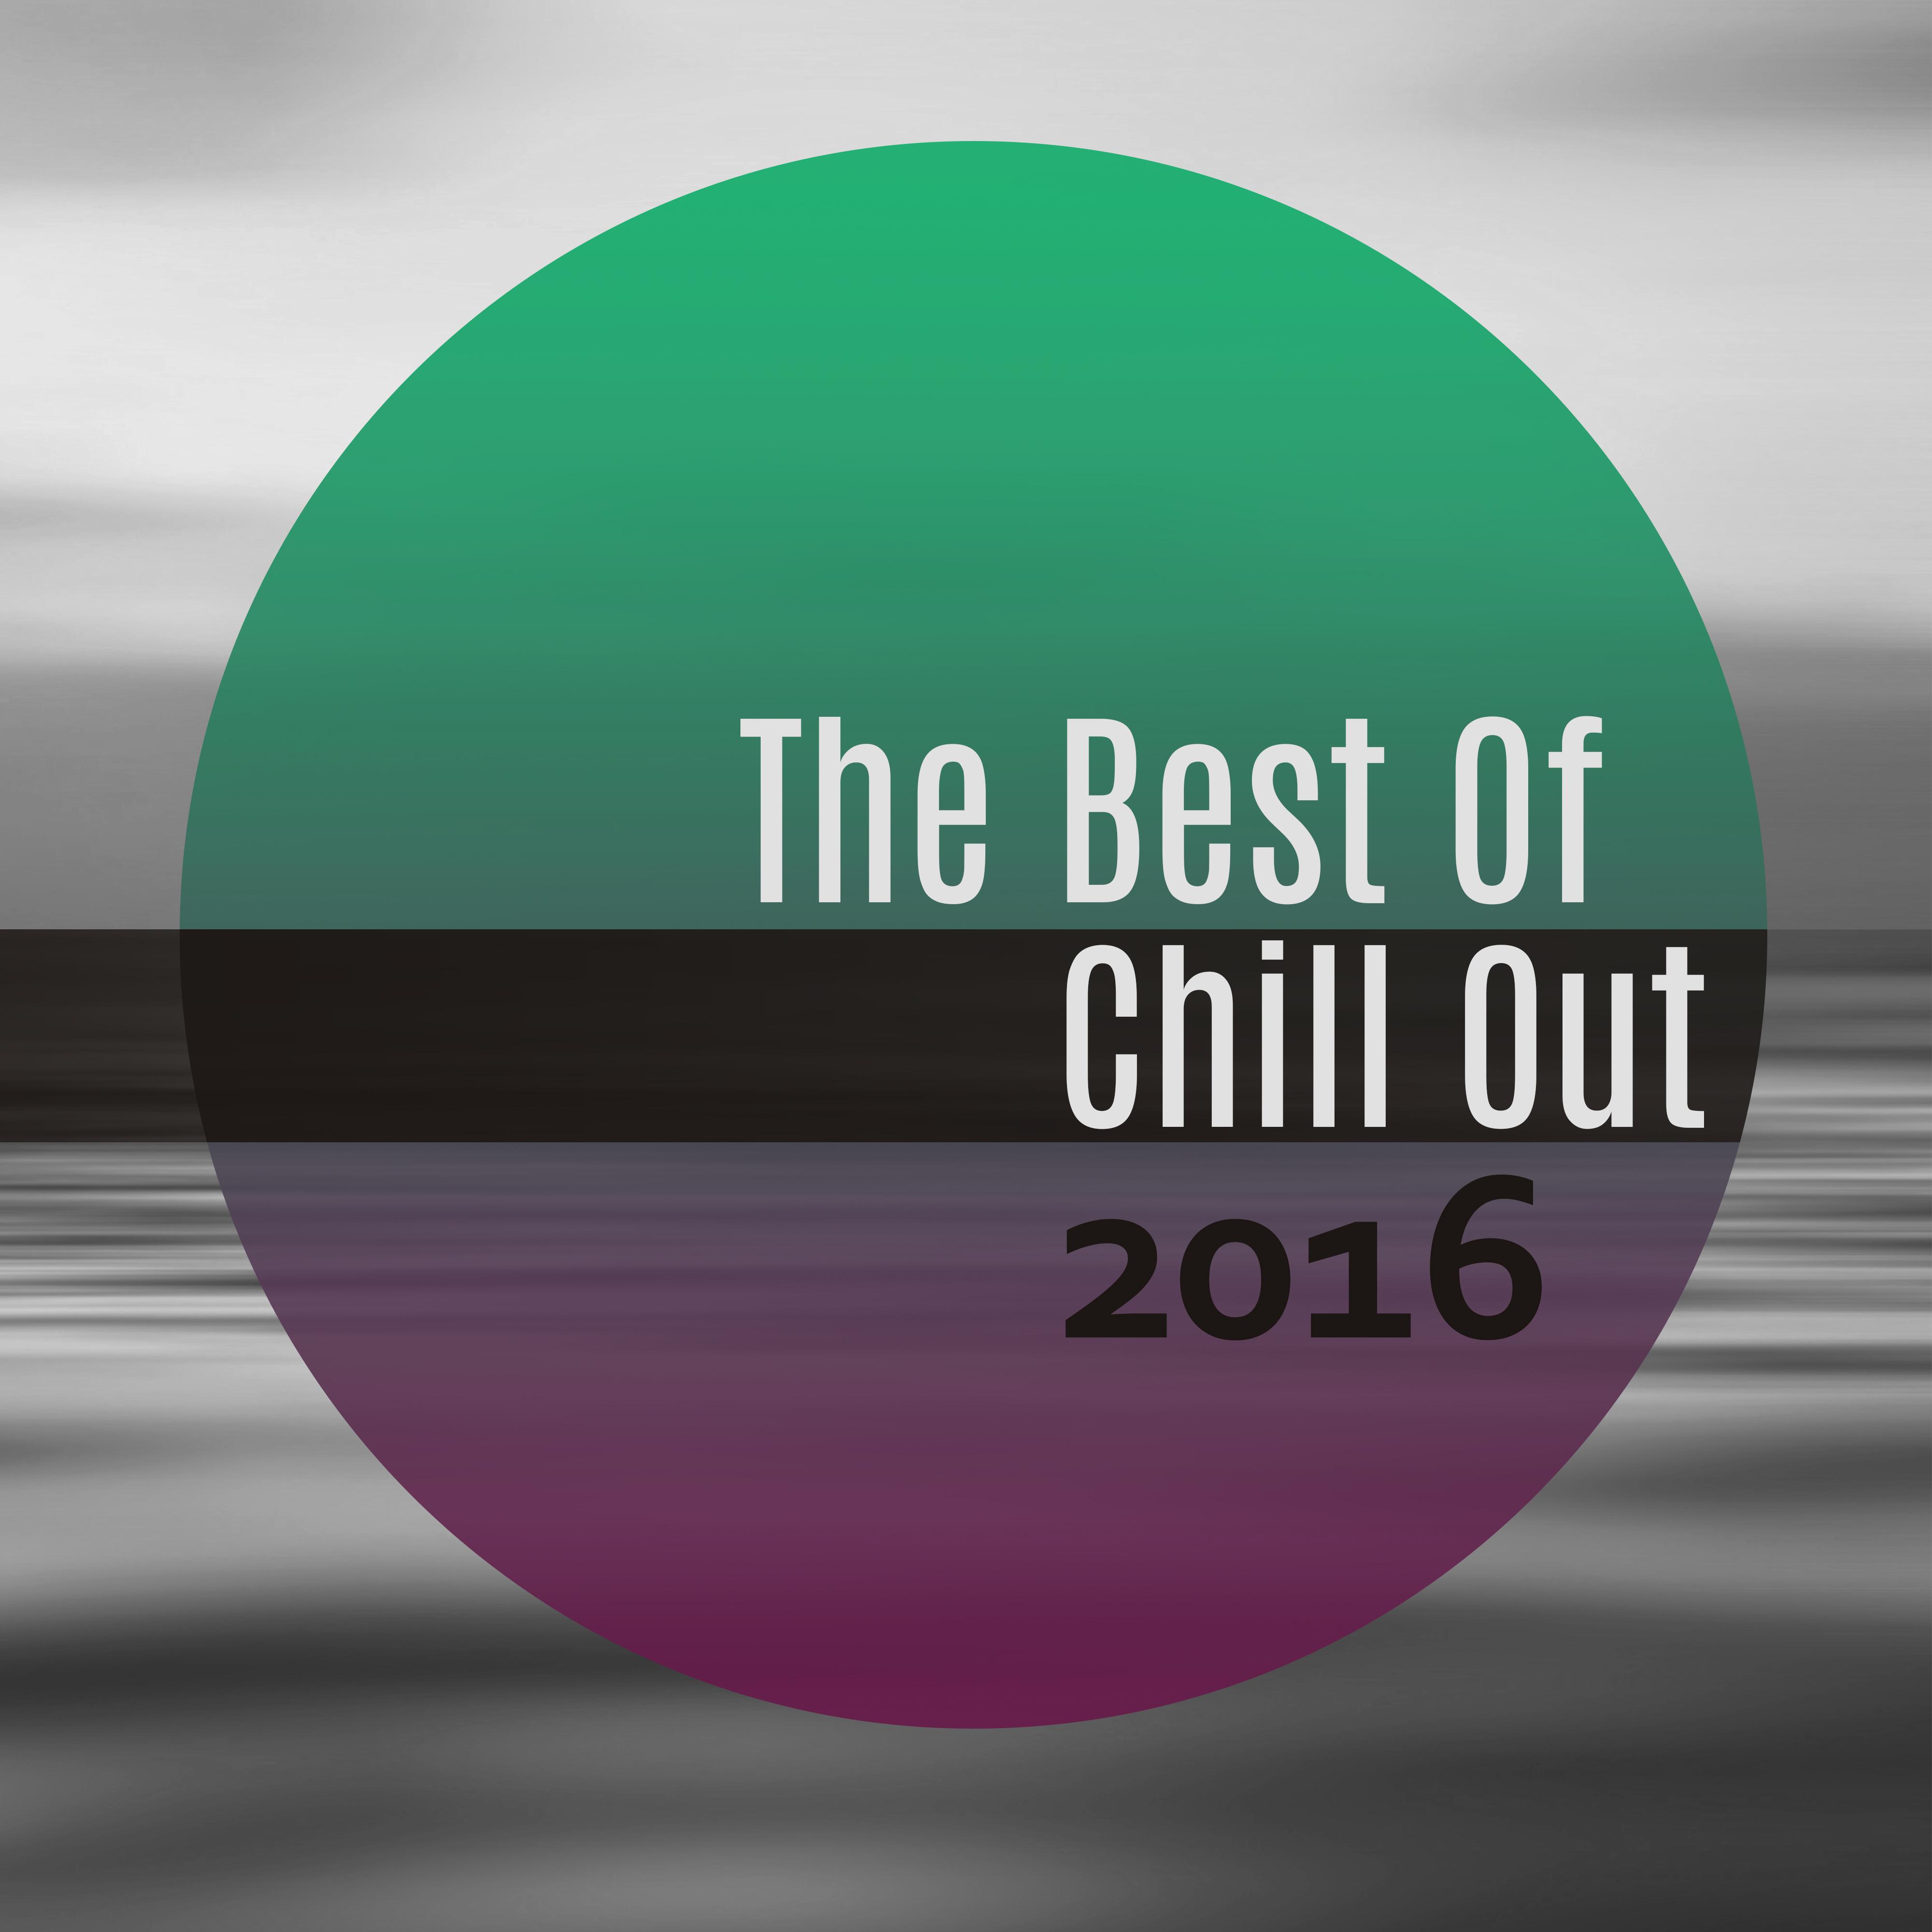 The Best of Chil Out 2016 – Deep Chill Out, Electronic Music, Rest, Relax